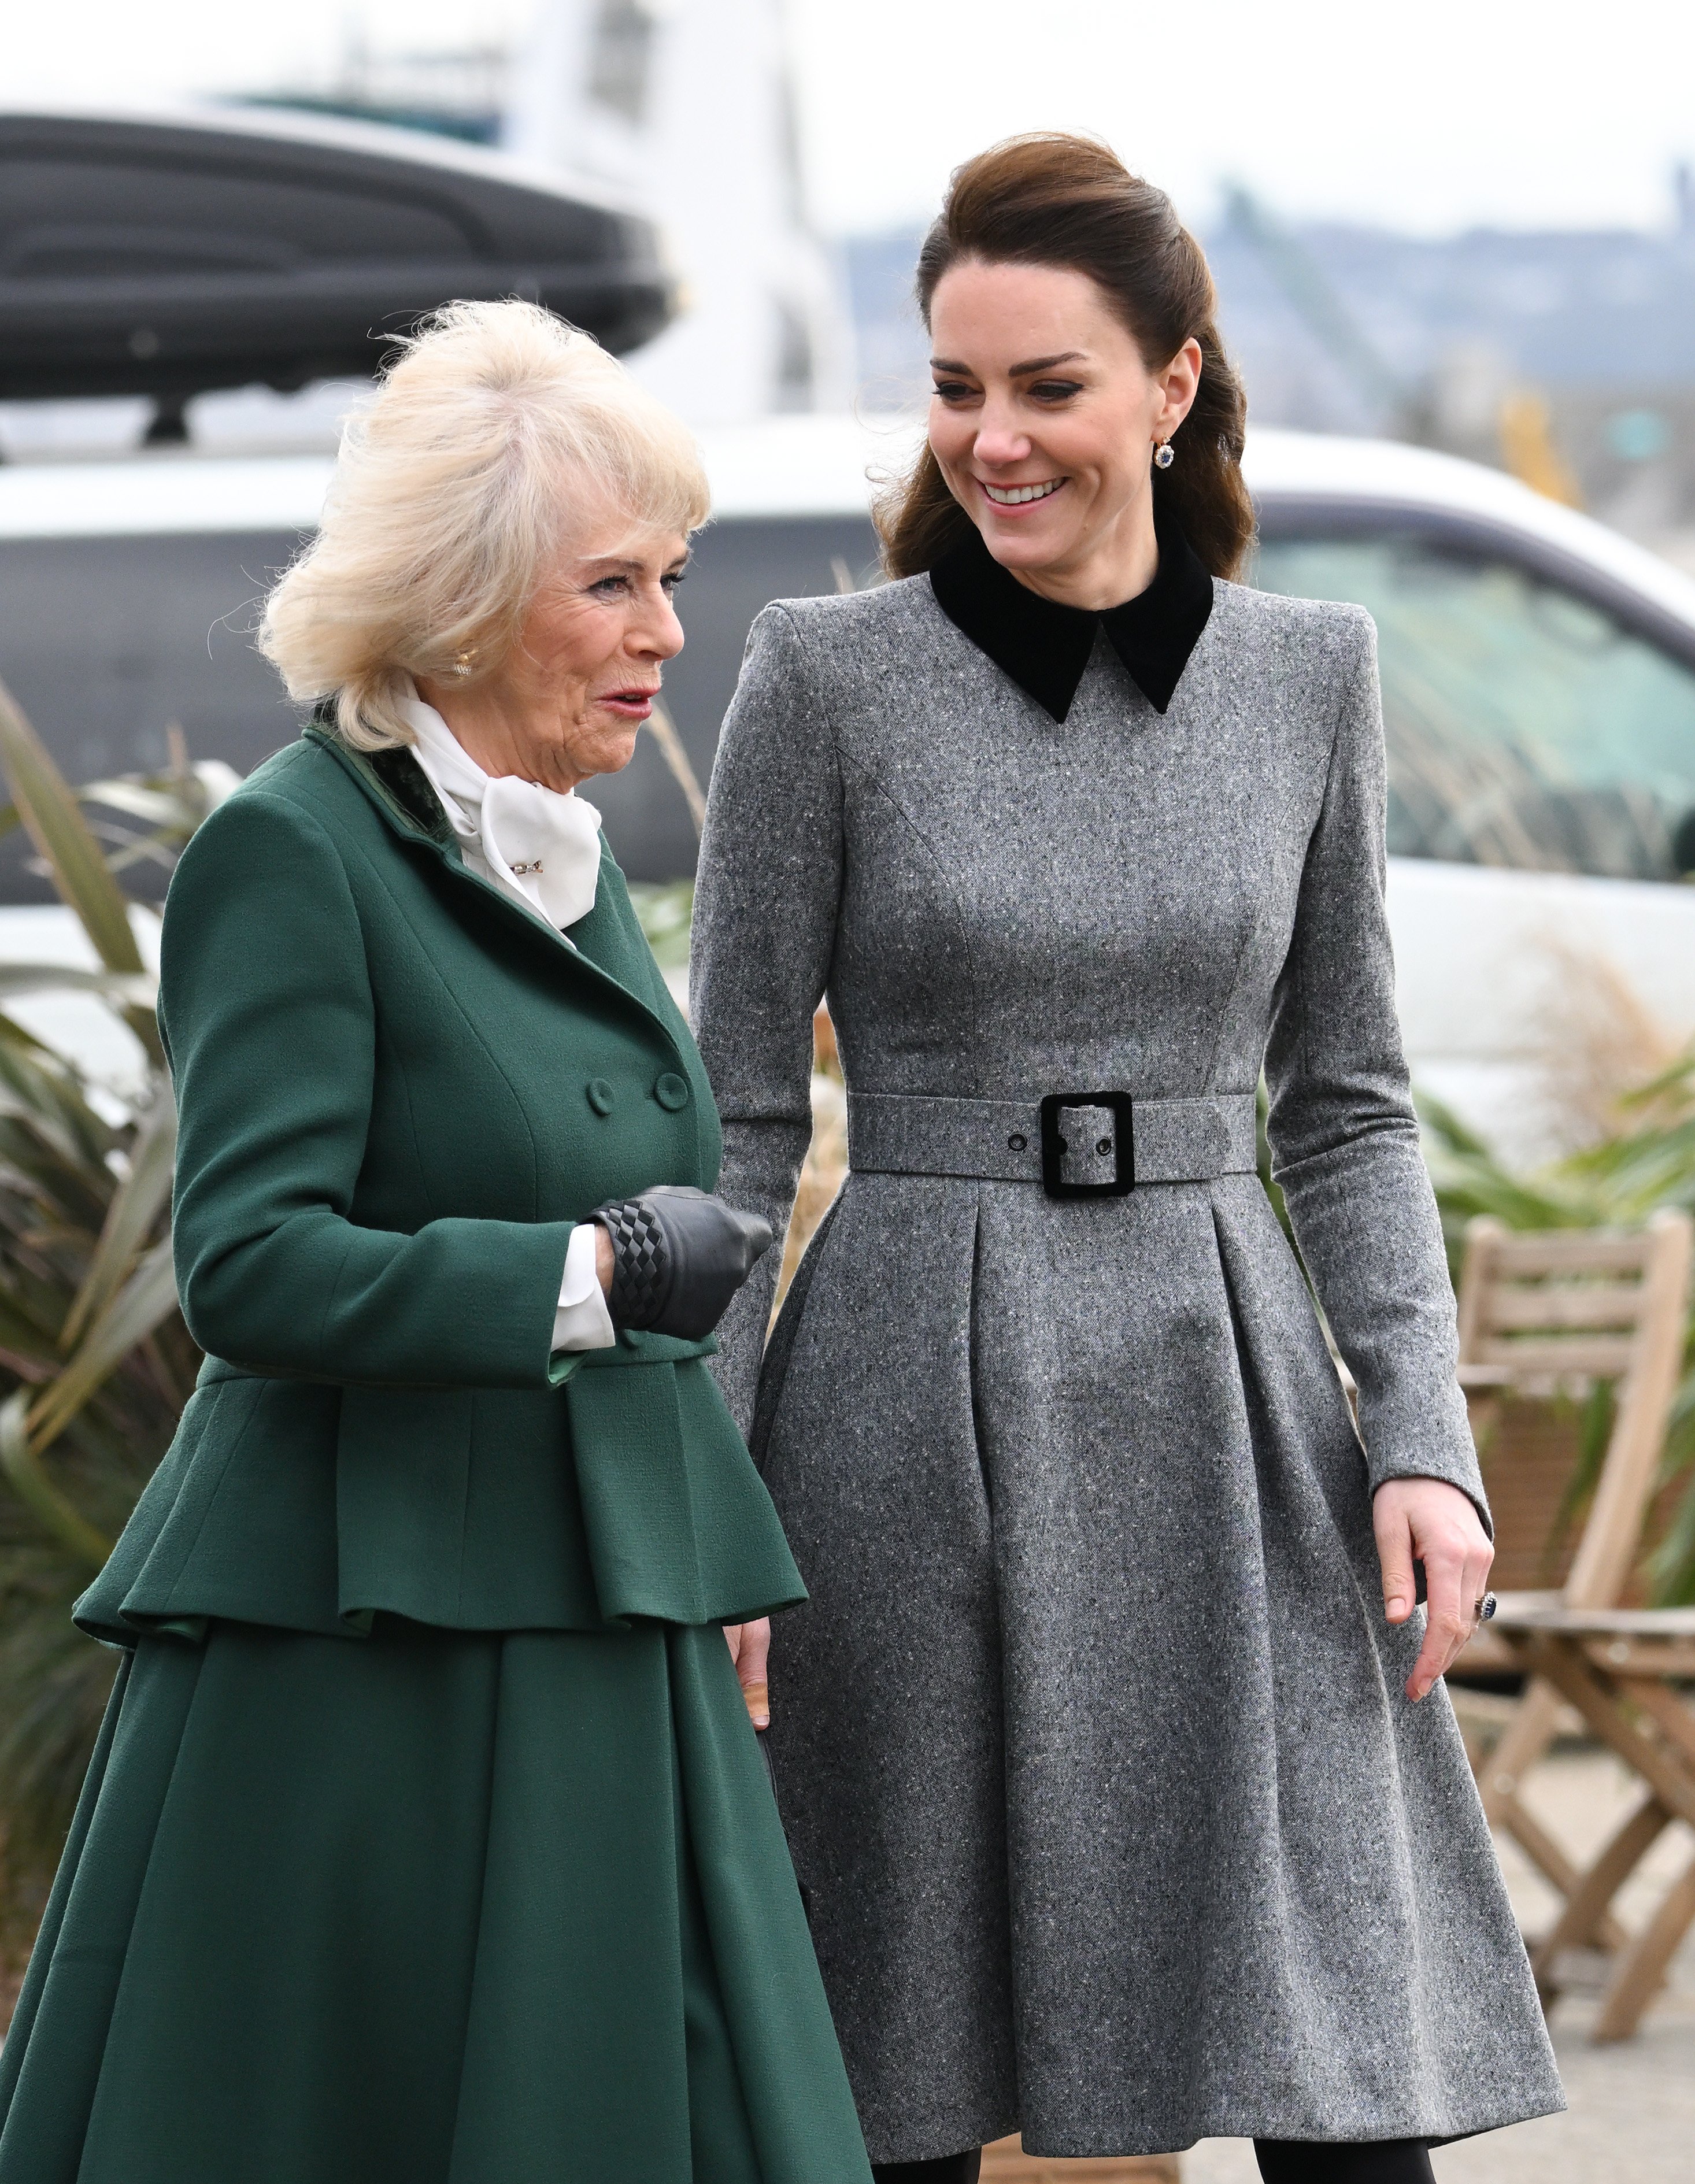 Duchess Camilla and Duchess Kate at The Prince's Foundation training site for arts and culture on February 3, 2022, in London, England. | Source: Getty Images